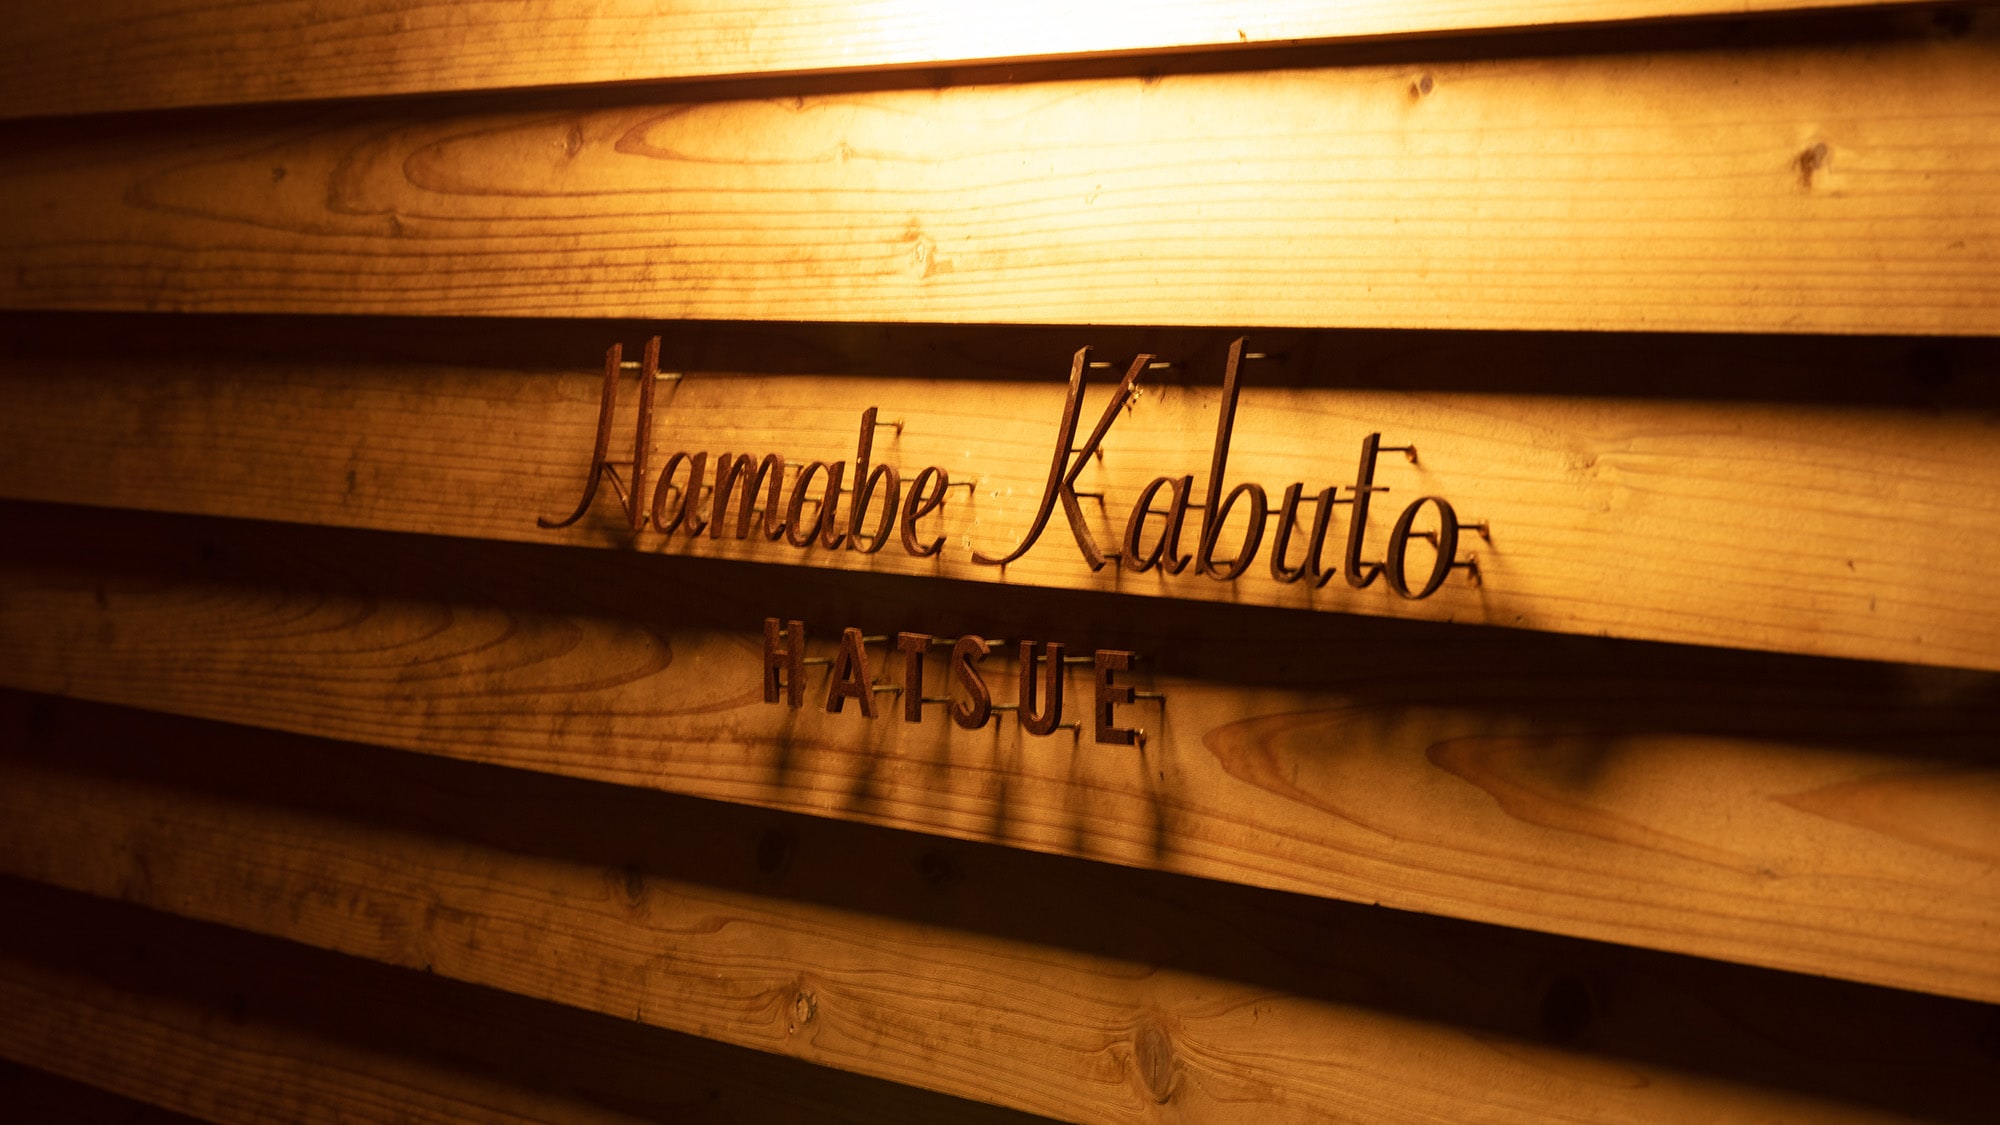 ・[Signboard] Welcome to Hamabe Kabuto HATSUE